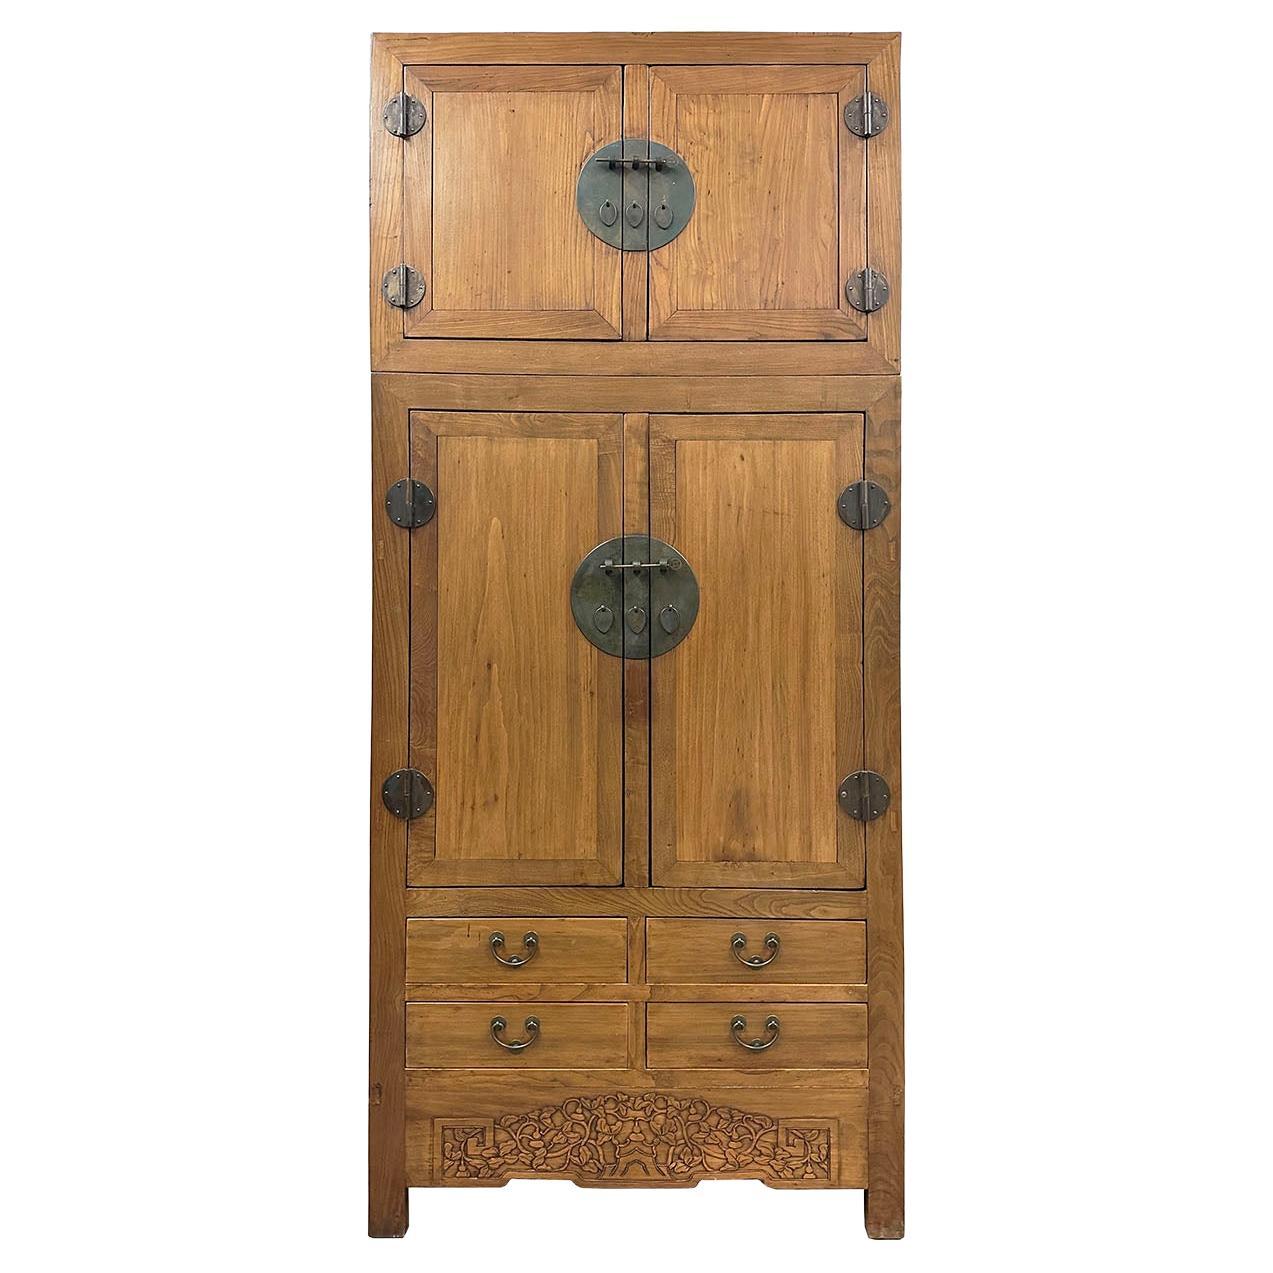 Early 20th Century Chinese Compound Wedding Armoire/Wardrobe Description